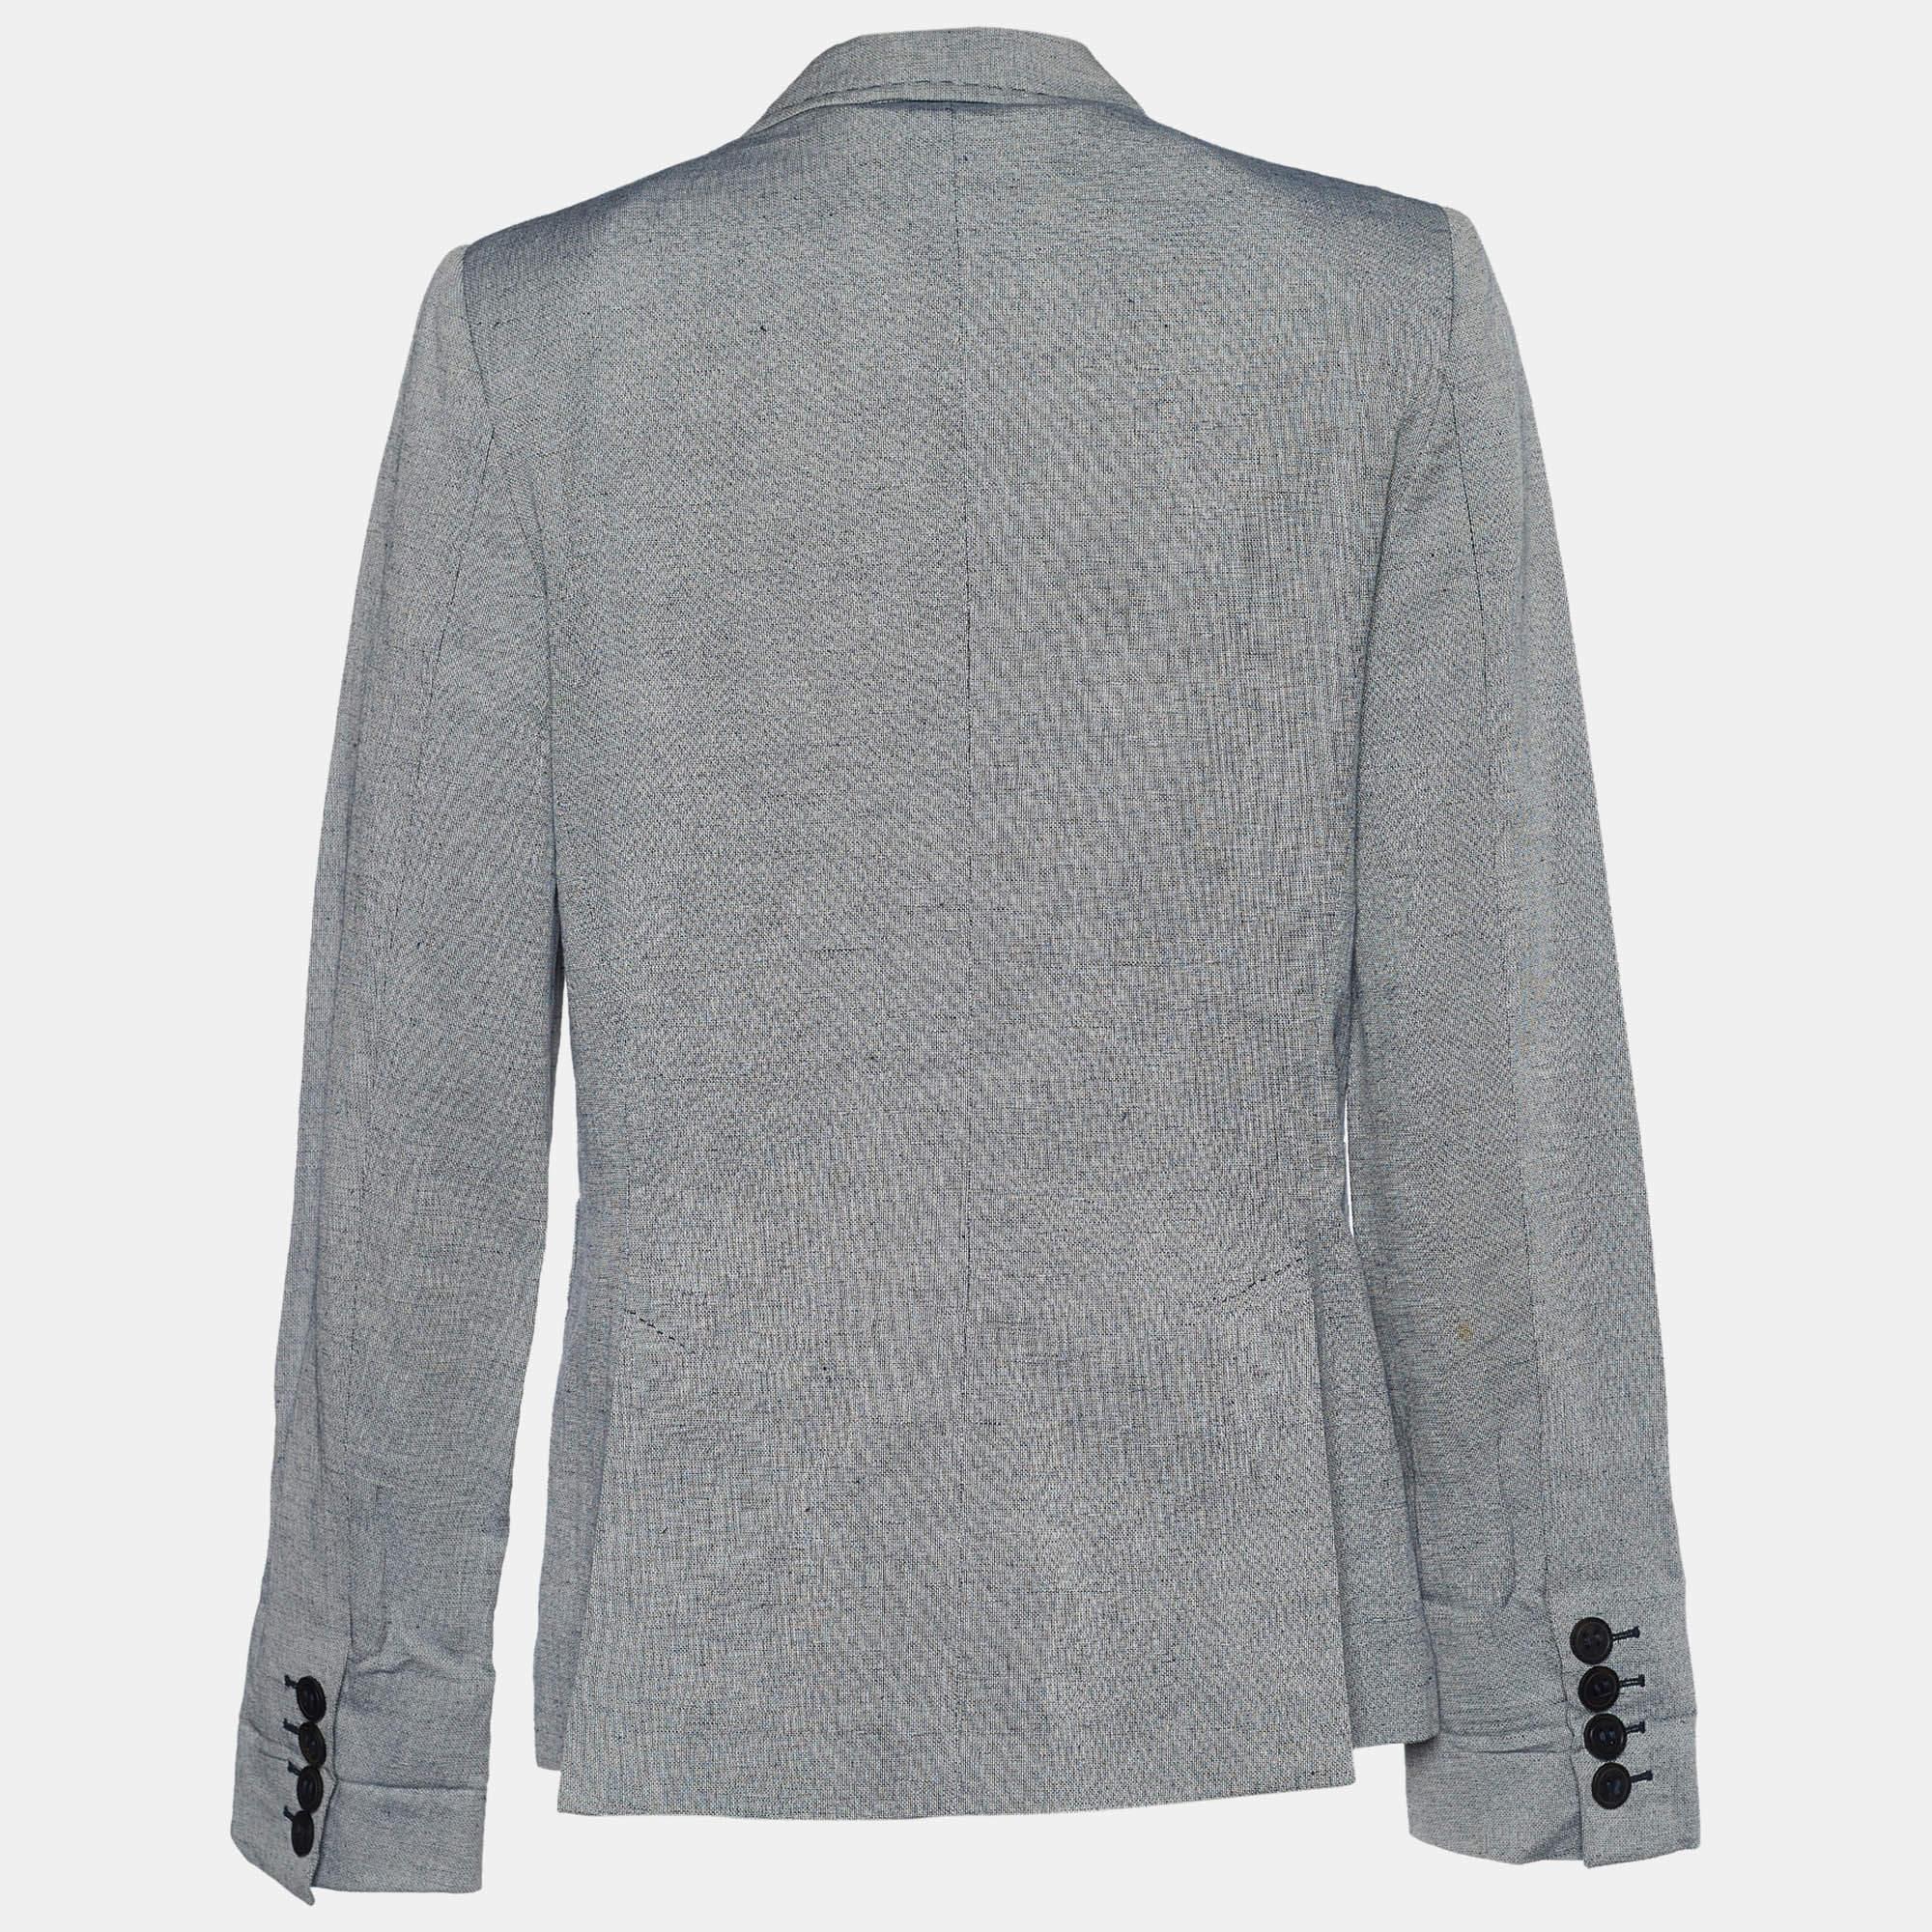 Lend a sharp, fashionable finish to your look with this Stella McCartney blazer. Tailored carefully using a linen blend, the grey blazer is added with a single-breasted front, notched lapels, and two pockets.

